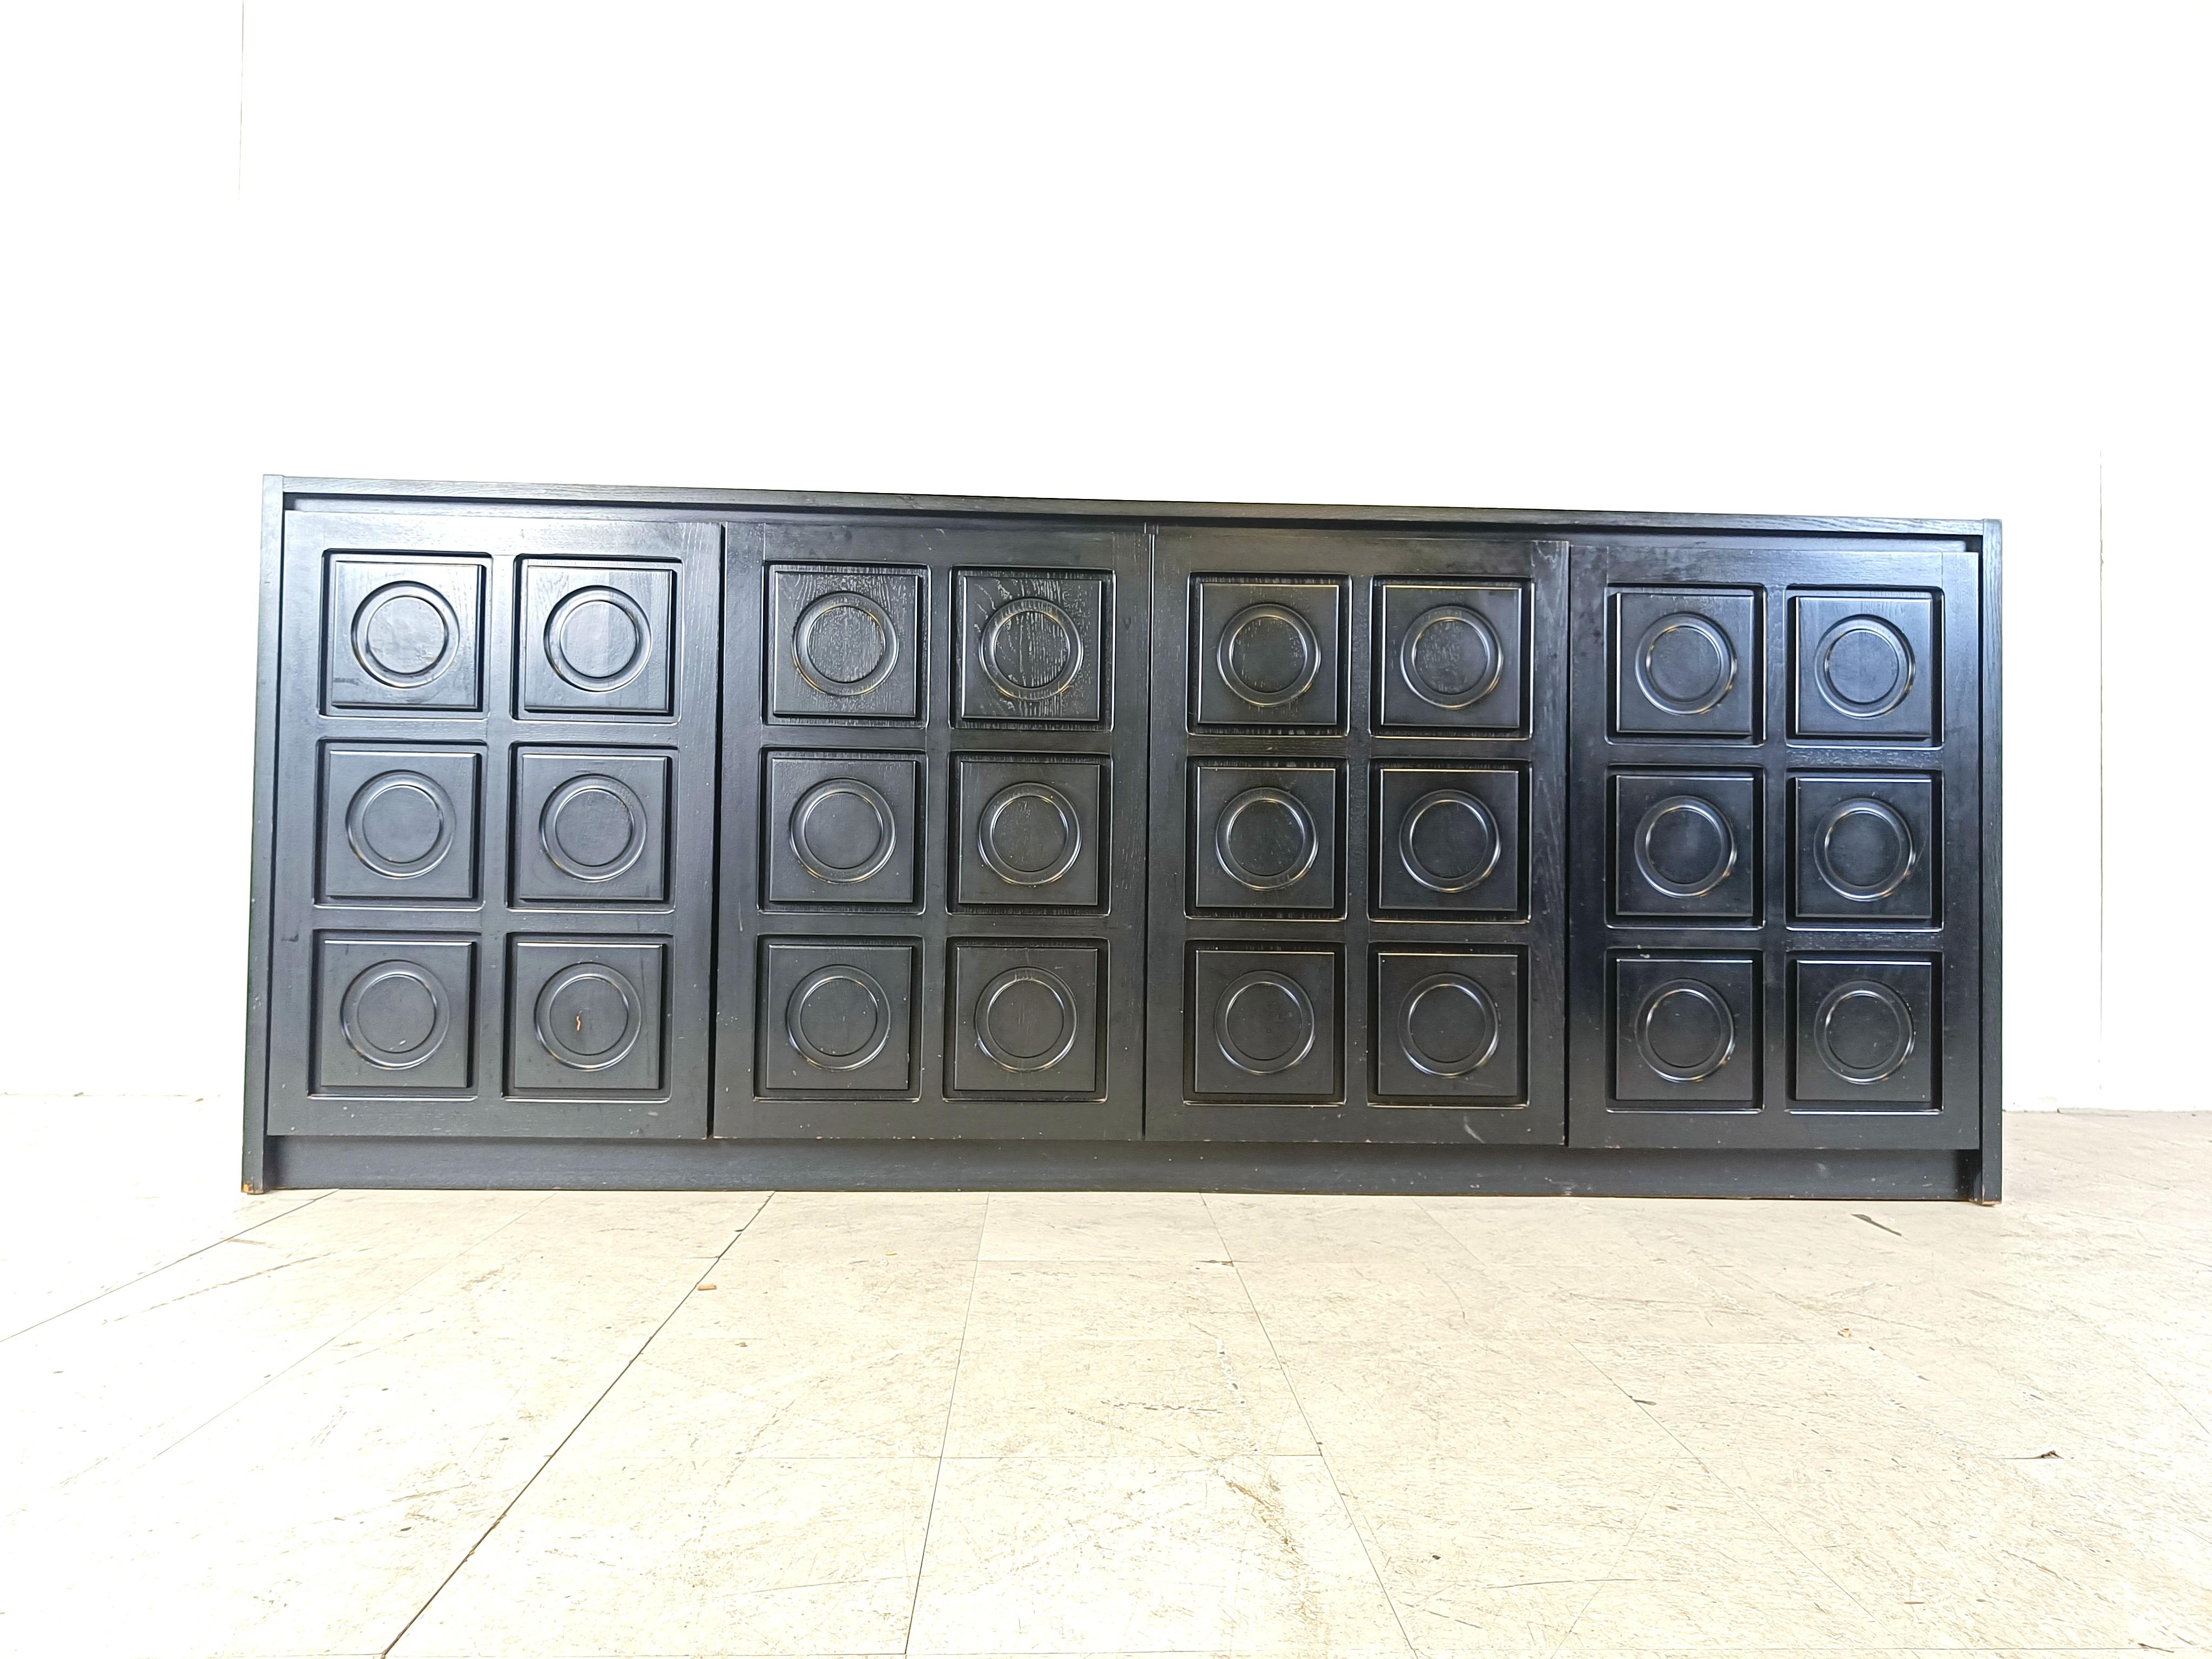 Ebonized black brutalist credenza with 4 graphical doors.

Beautiful timeless design.

Very good condition.

1970s - Belgium

Dimensions:

Lenght: 250cm/98.42